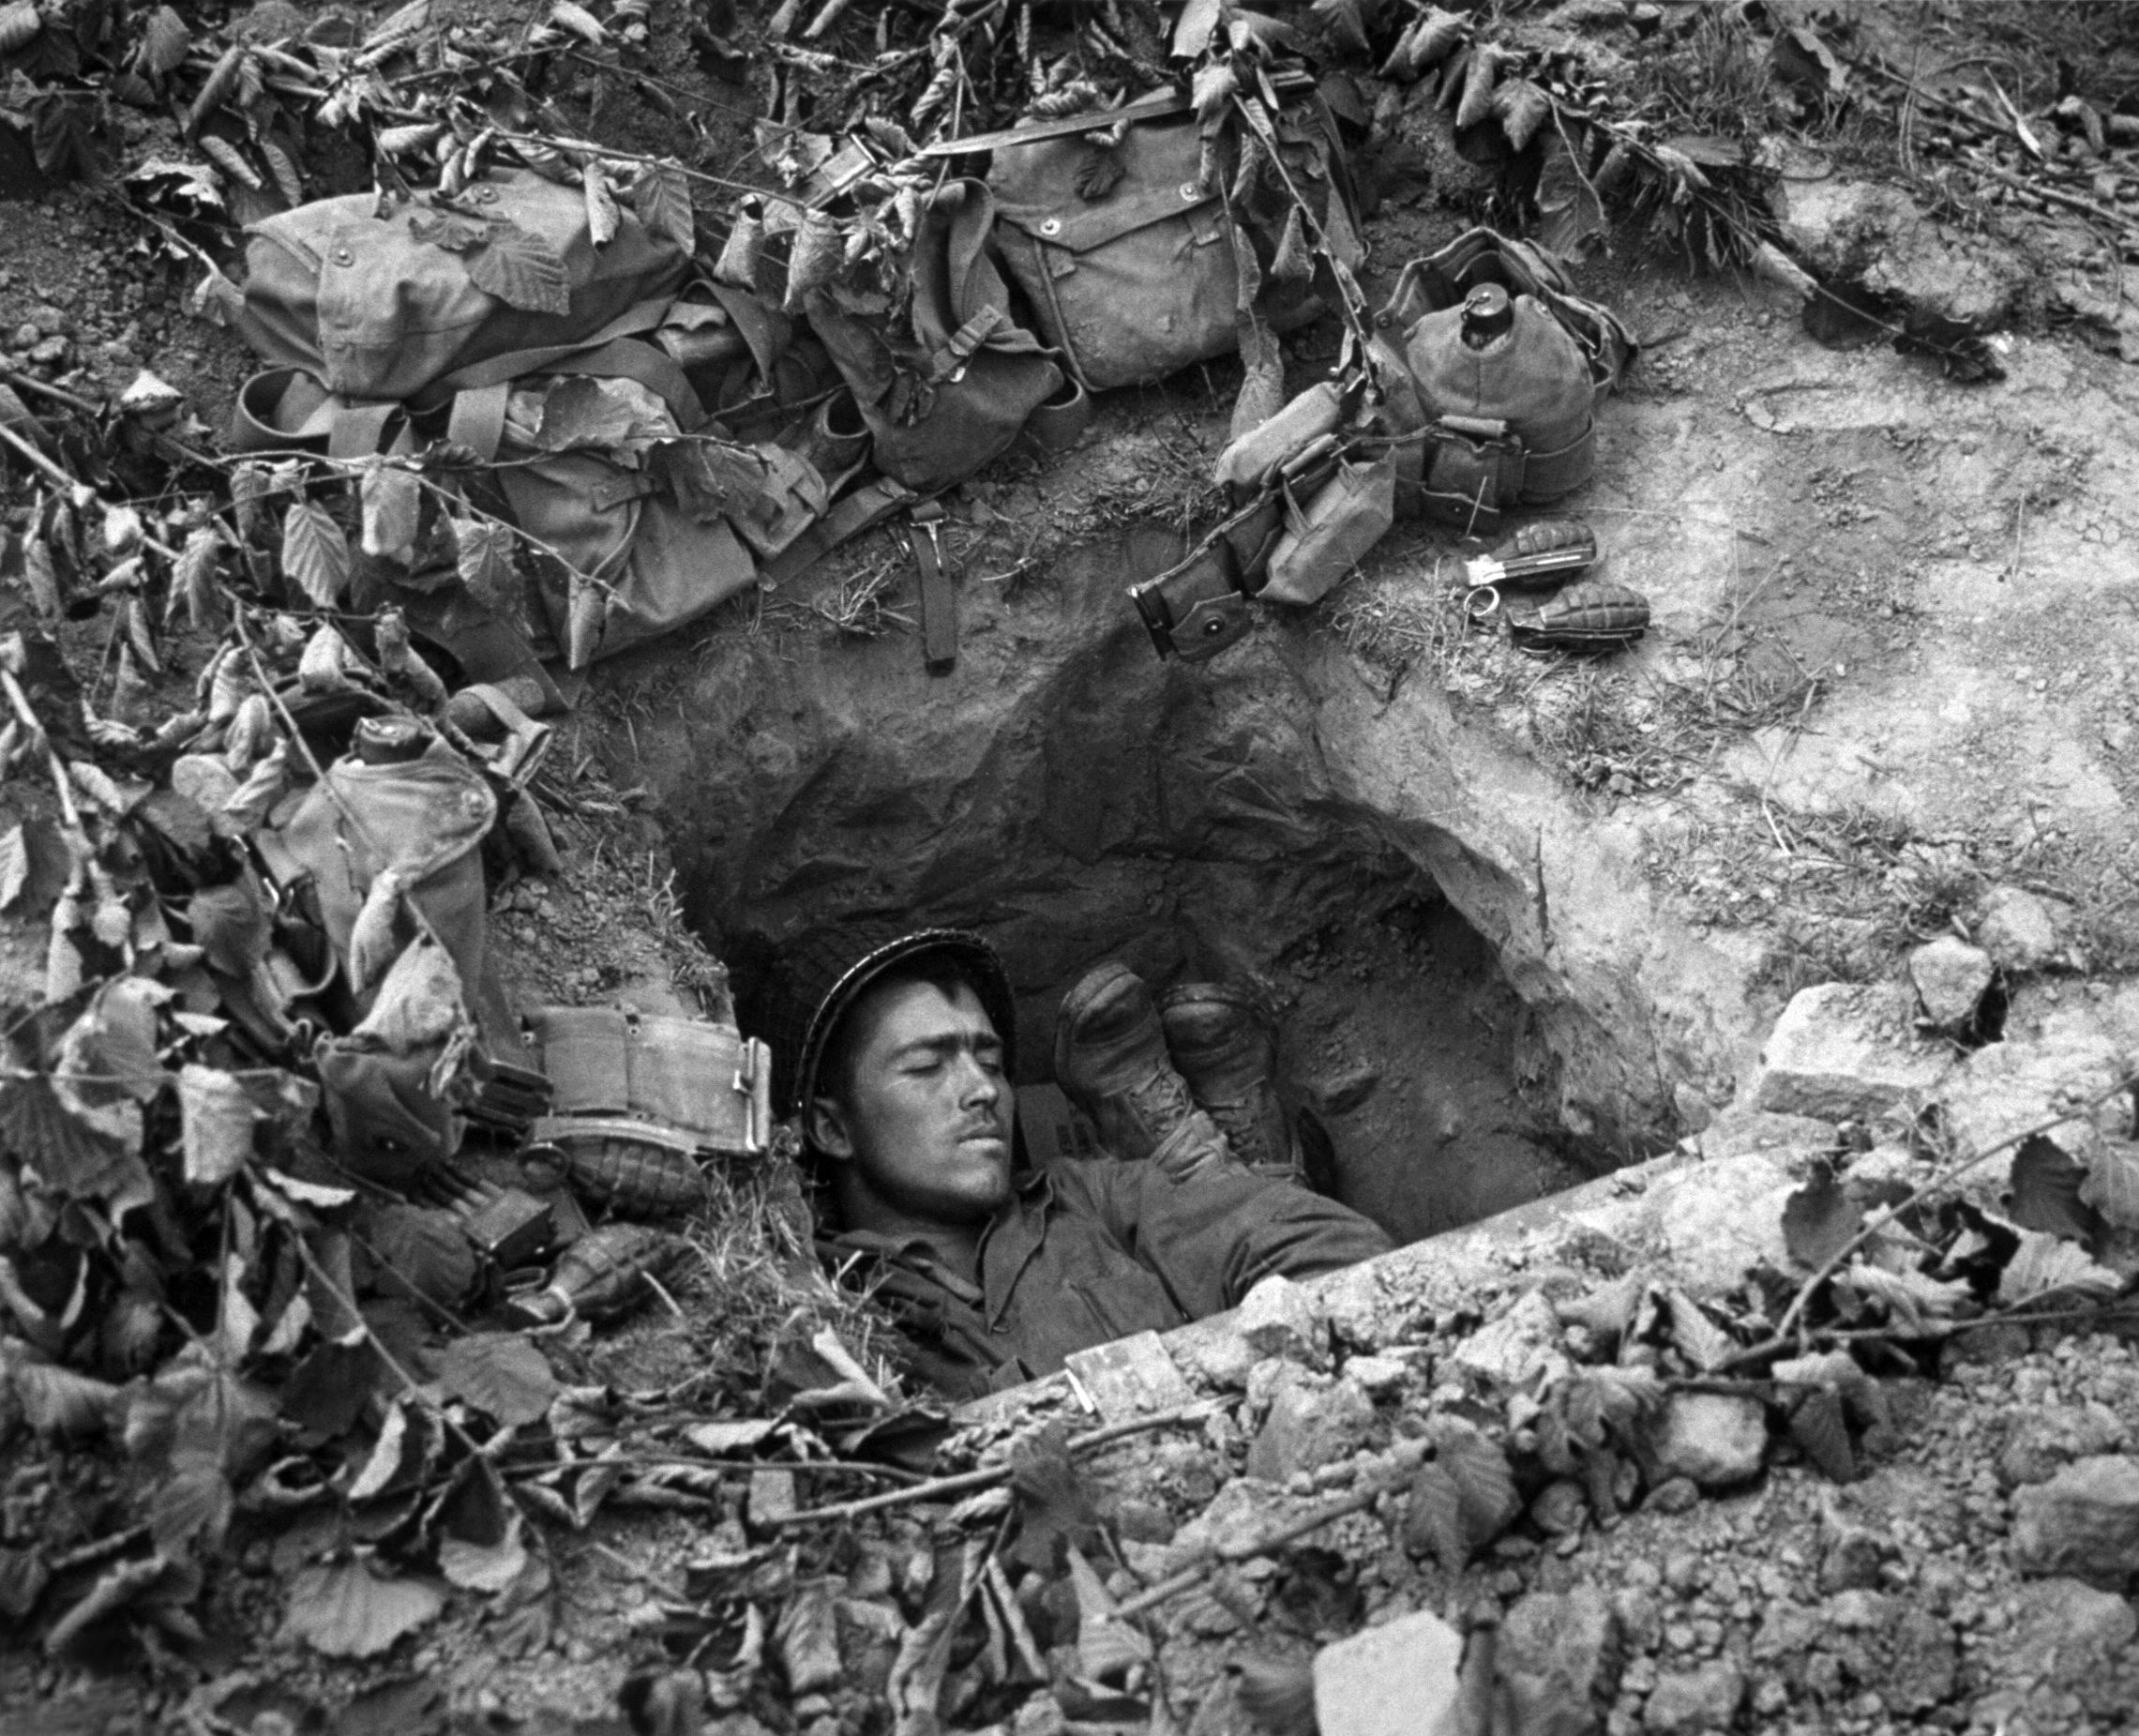 1944: An American GI asleep in a trench in Normandy.